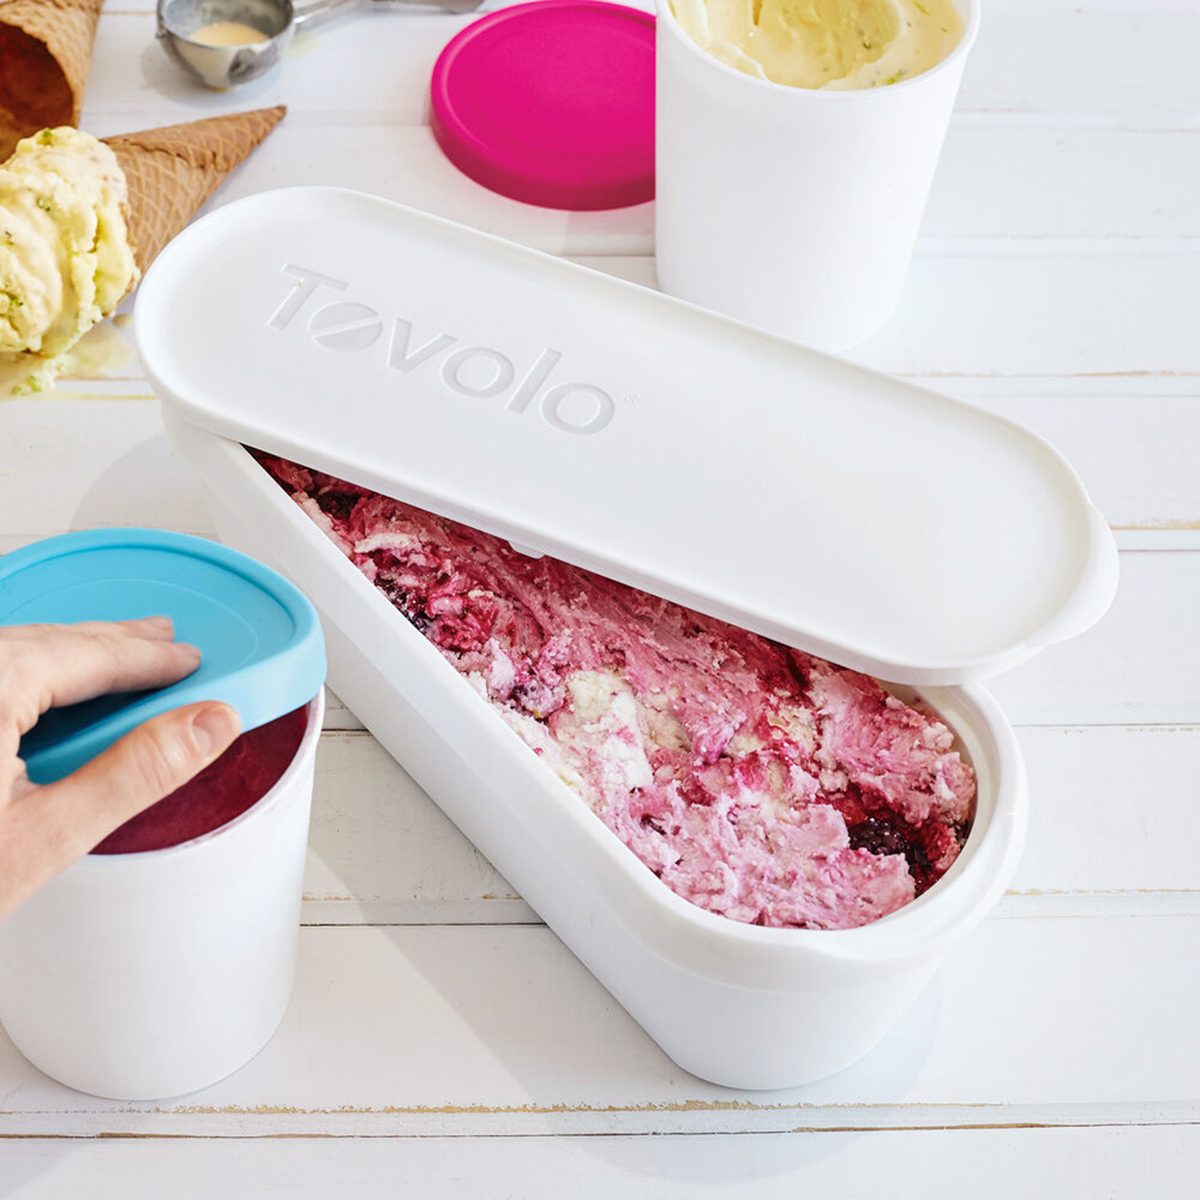 https://www.tasteofhome.com/wp-content/uploads/2020/05/TOVOLO-GLIDE-A-SCOOP-ICE-CREAM-CONTAINER.jpg?fit=700%2C700